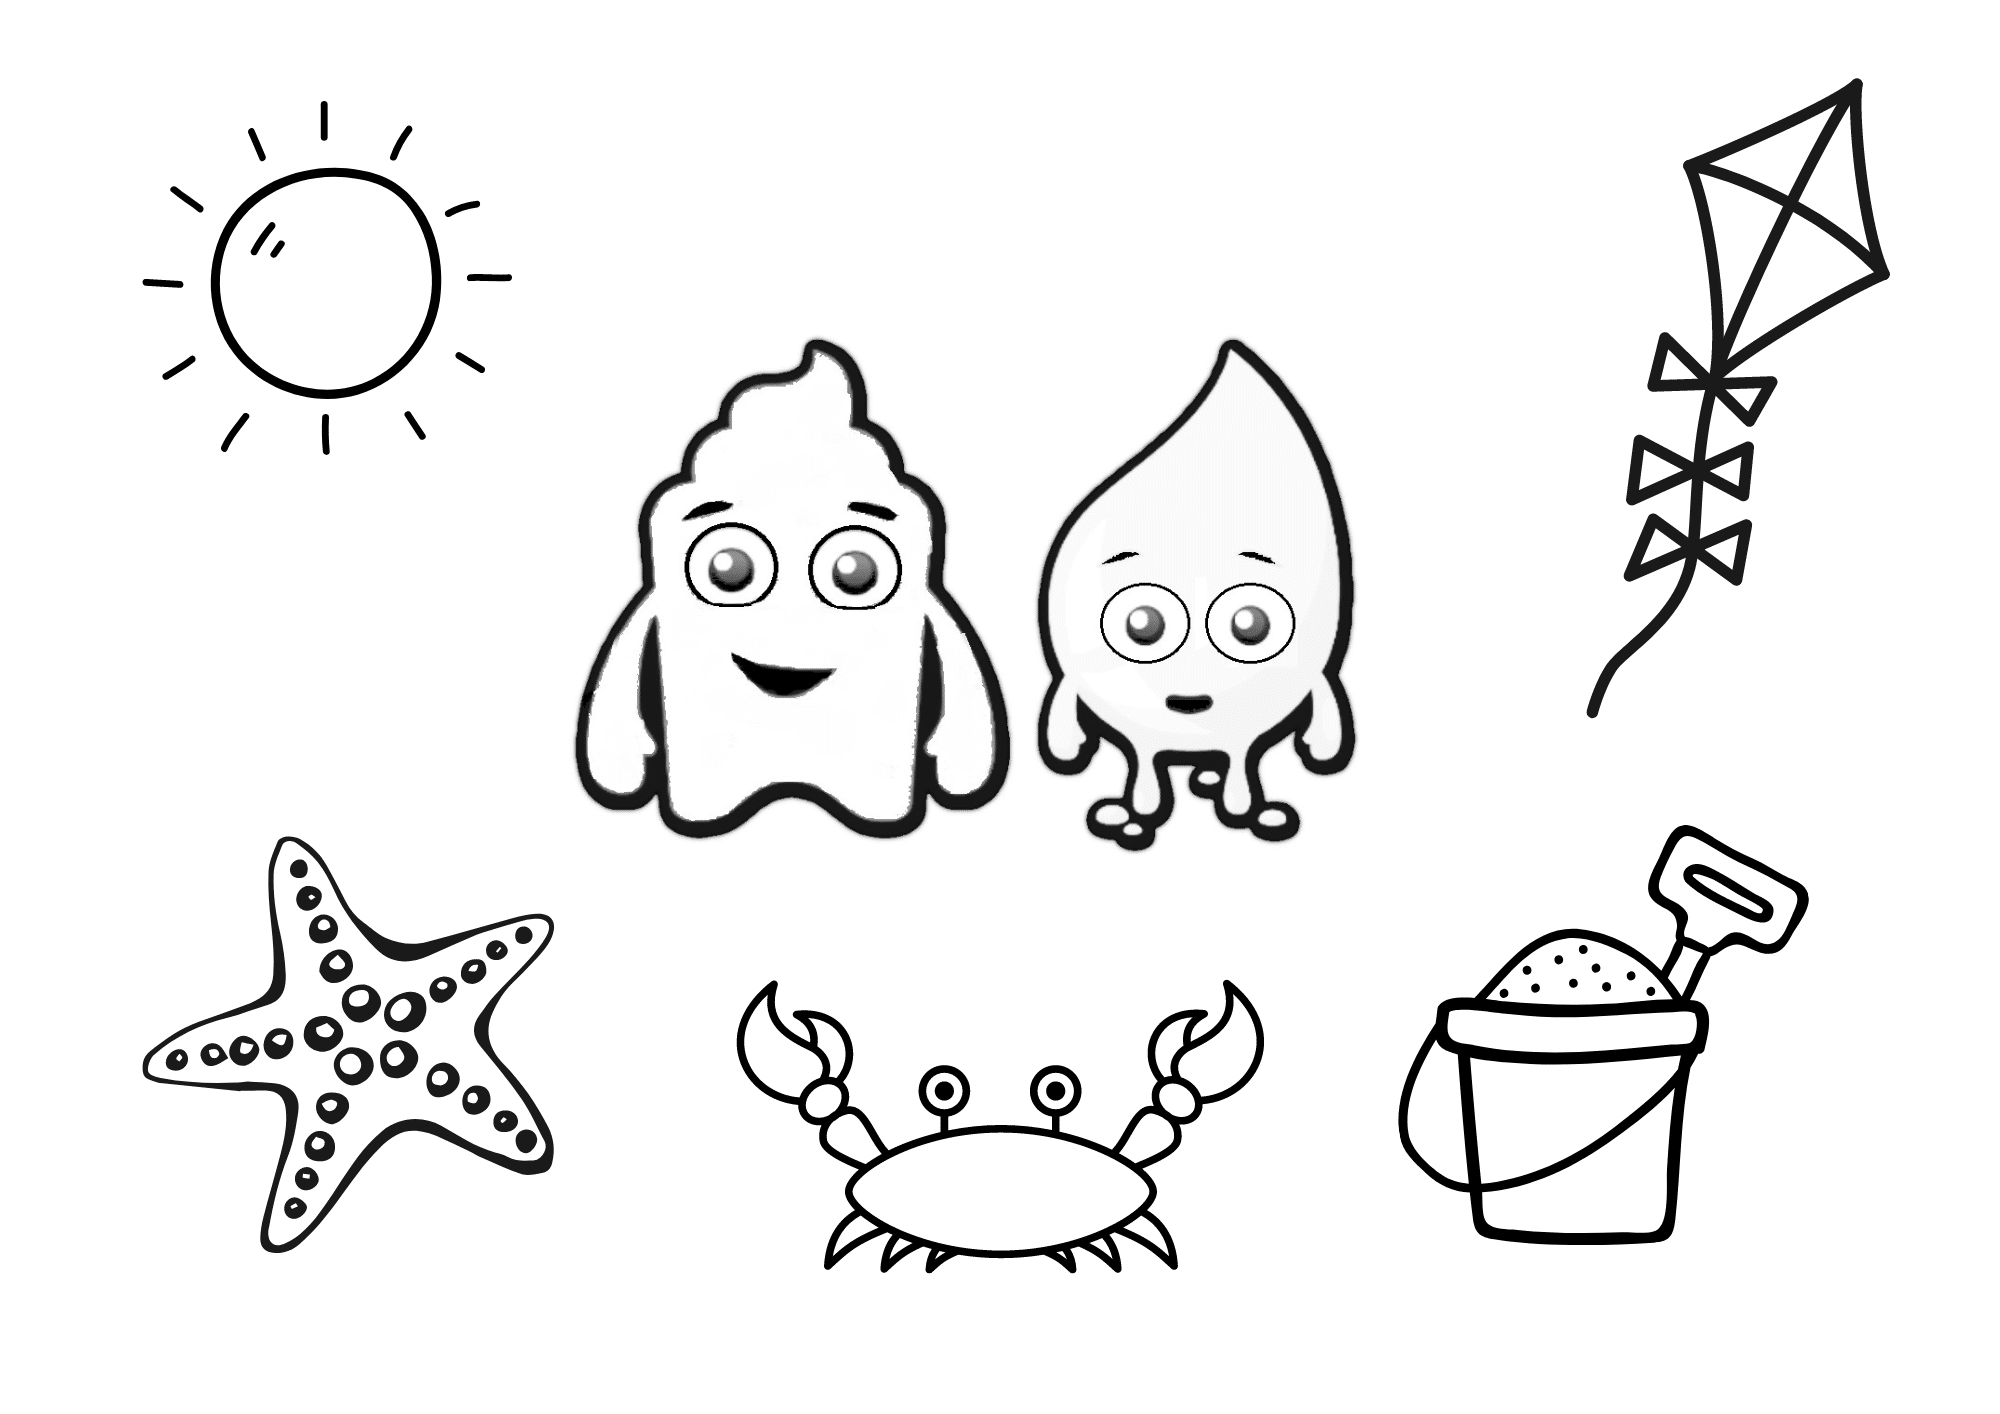 Poo and Wee with a sun, starfish, crab, kite and bucket and spade